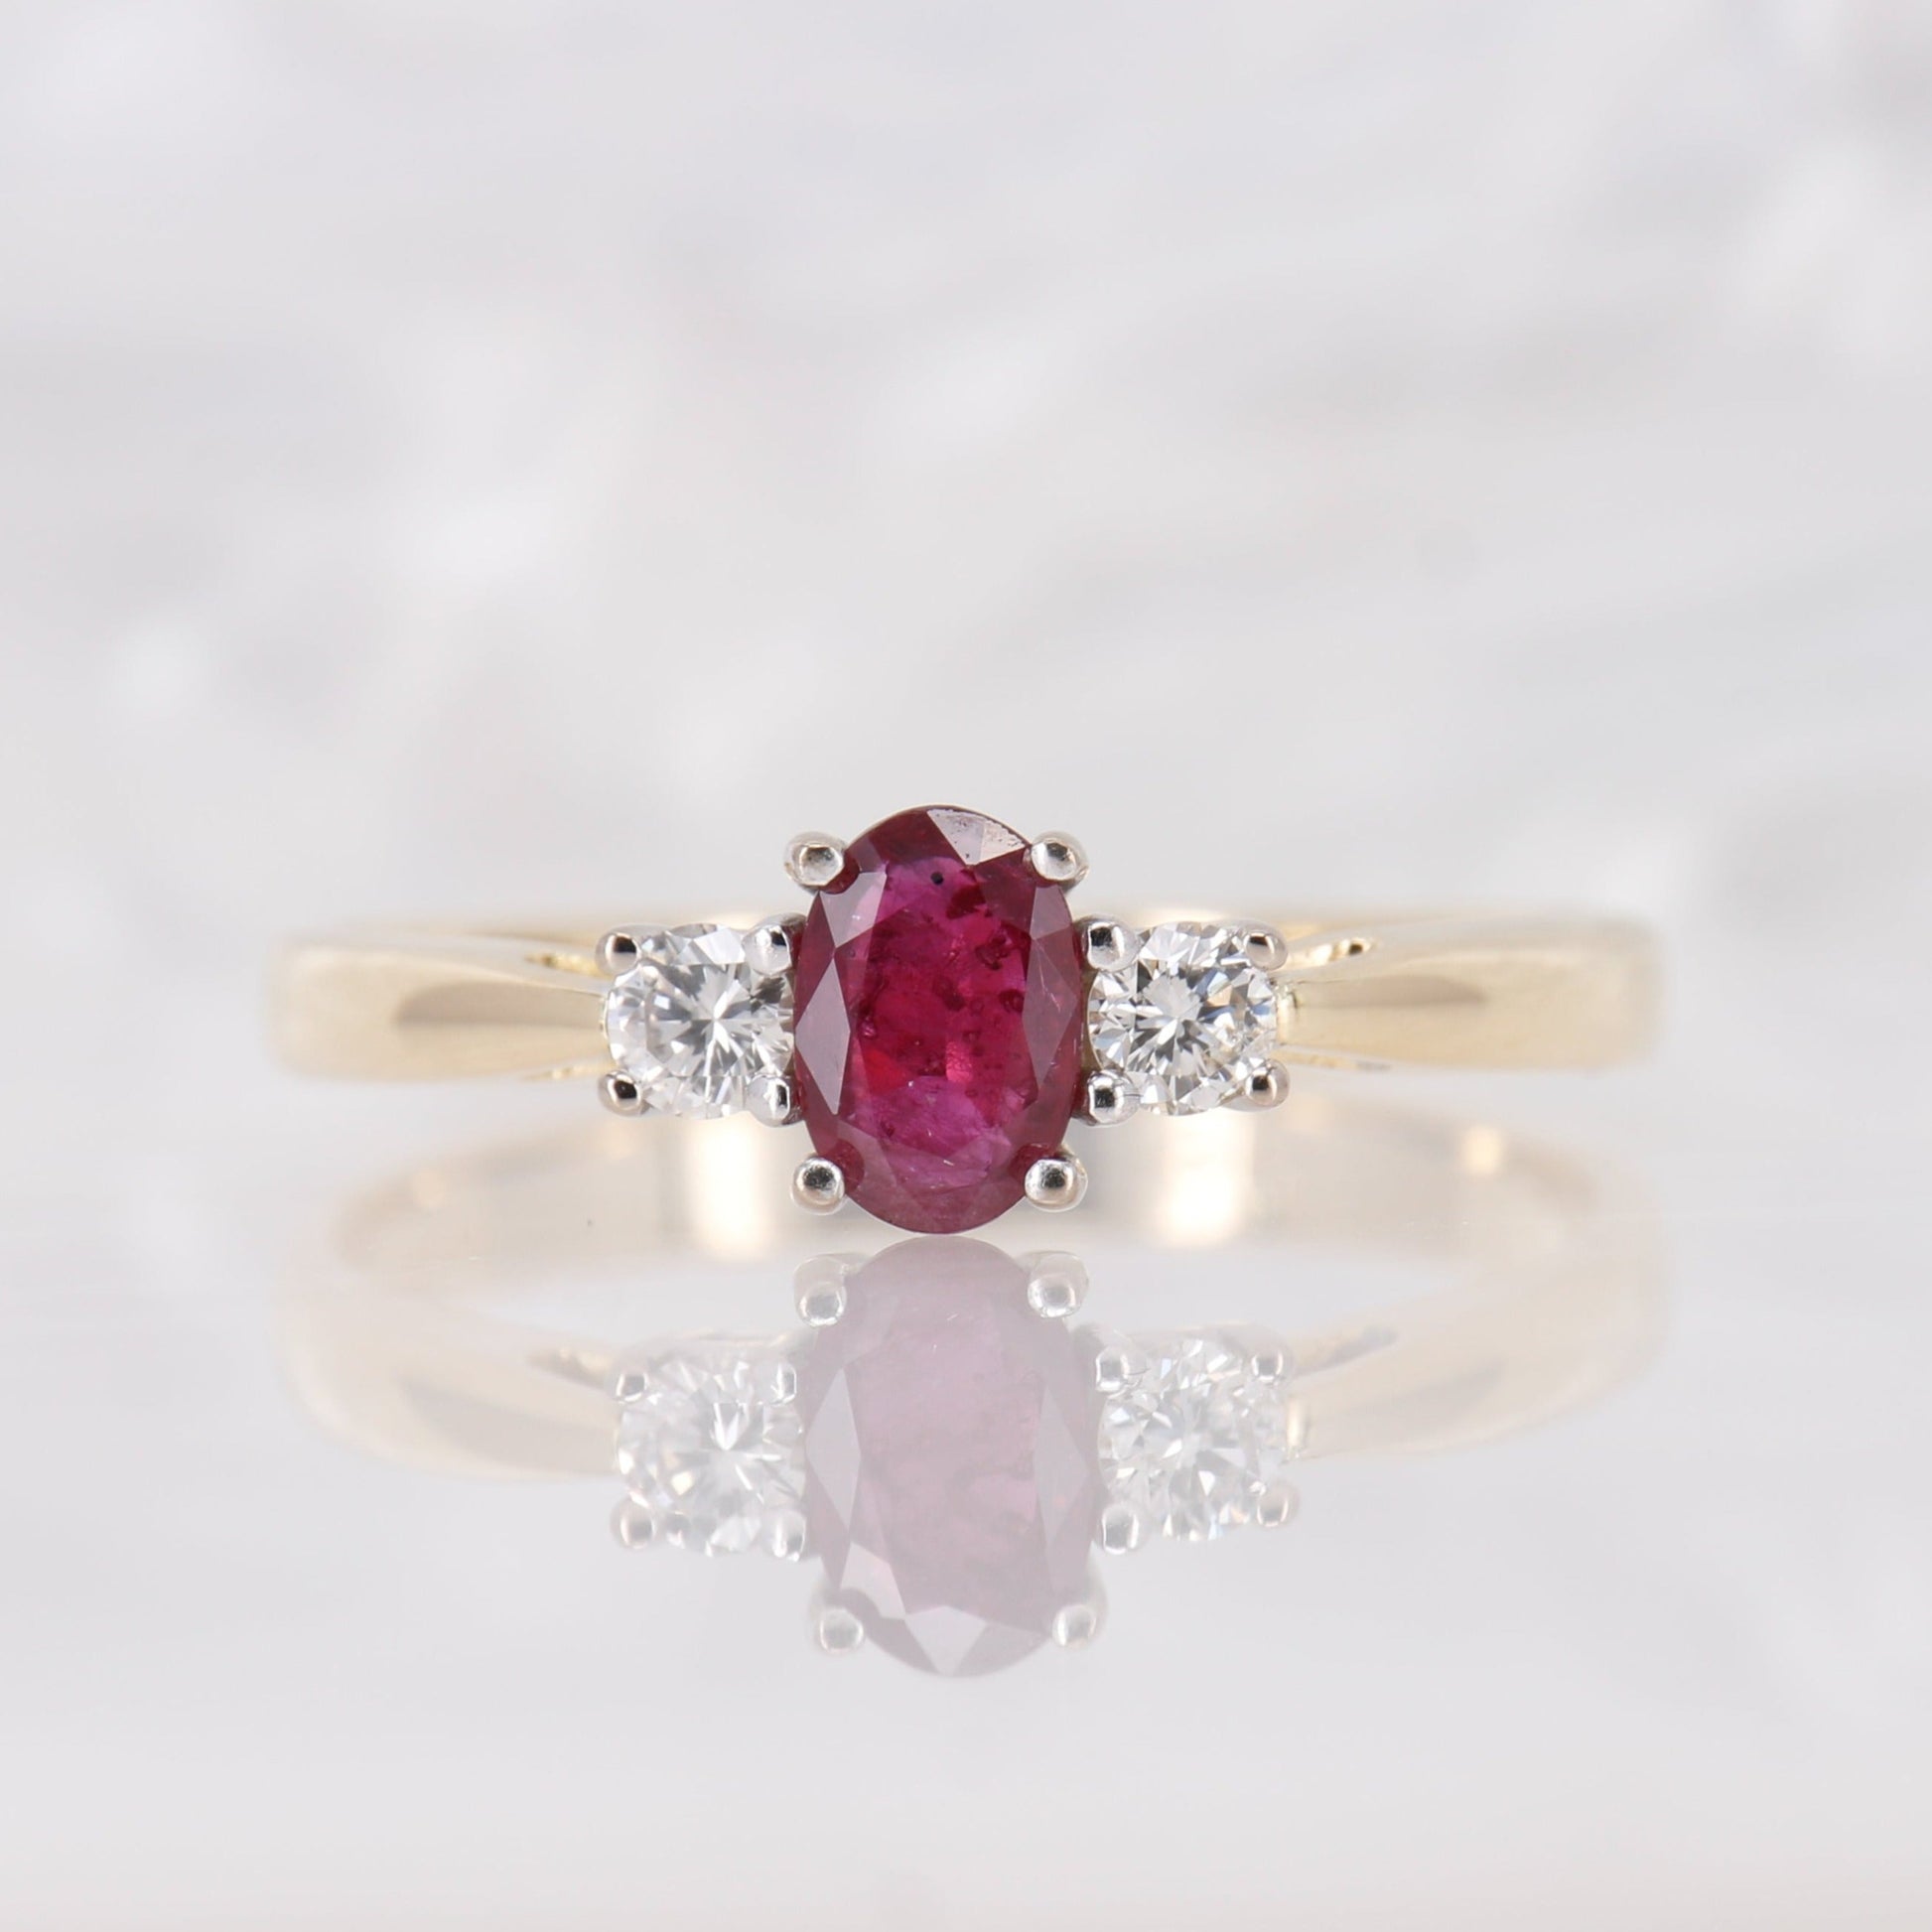 Preowned Oval cut Ruby and Diamond Trilogy Three Stone Engagement Ring